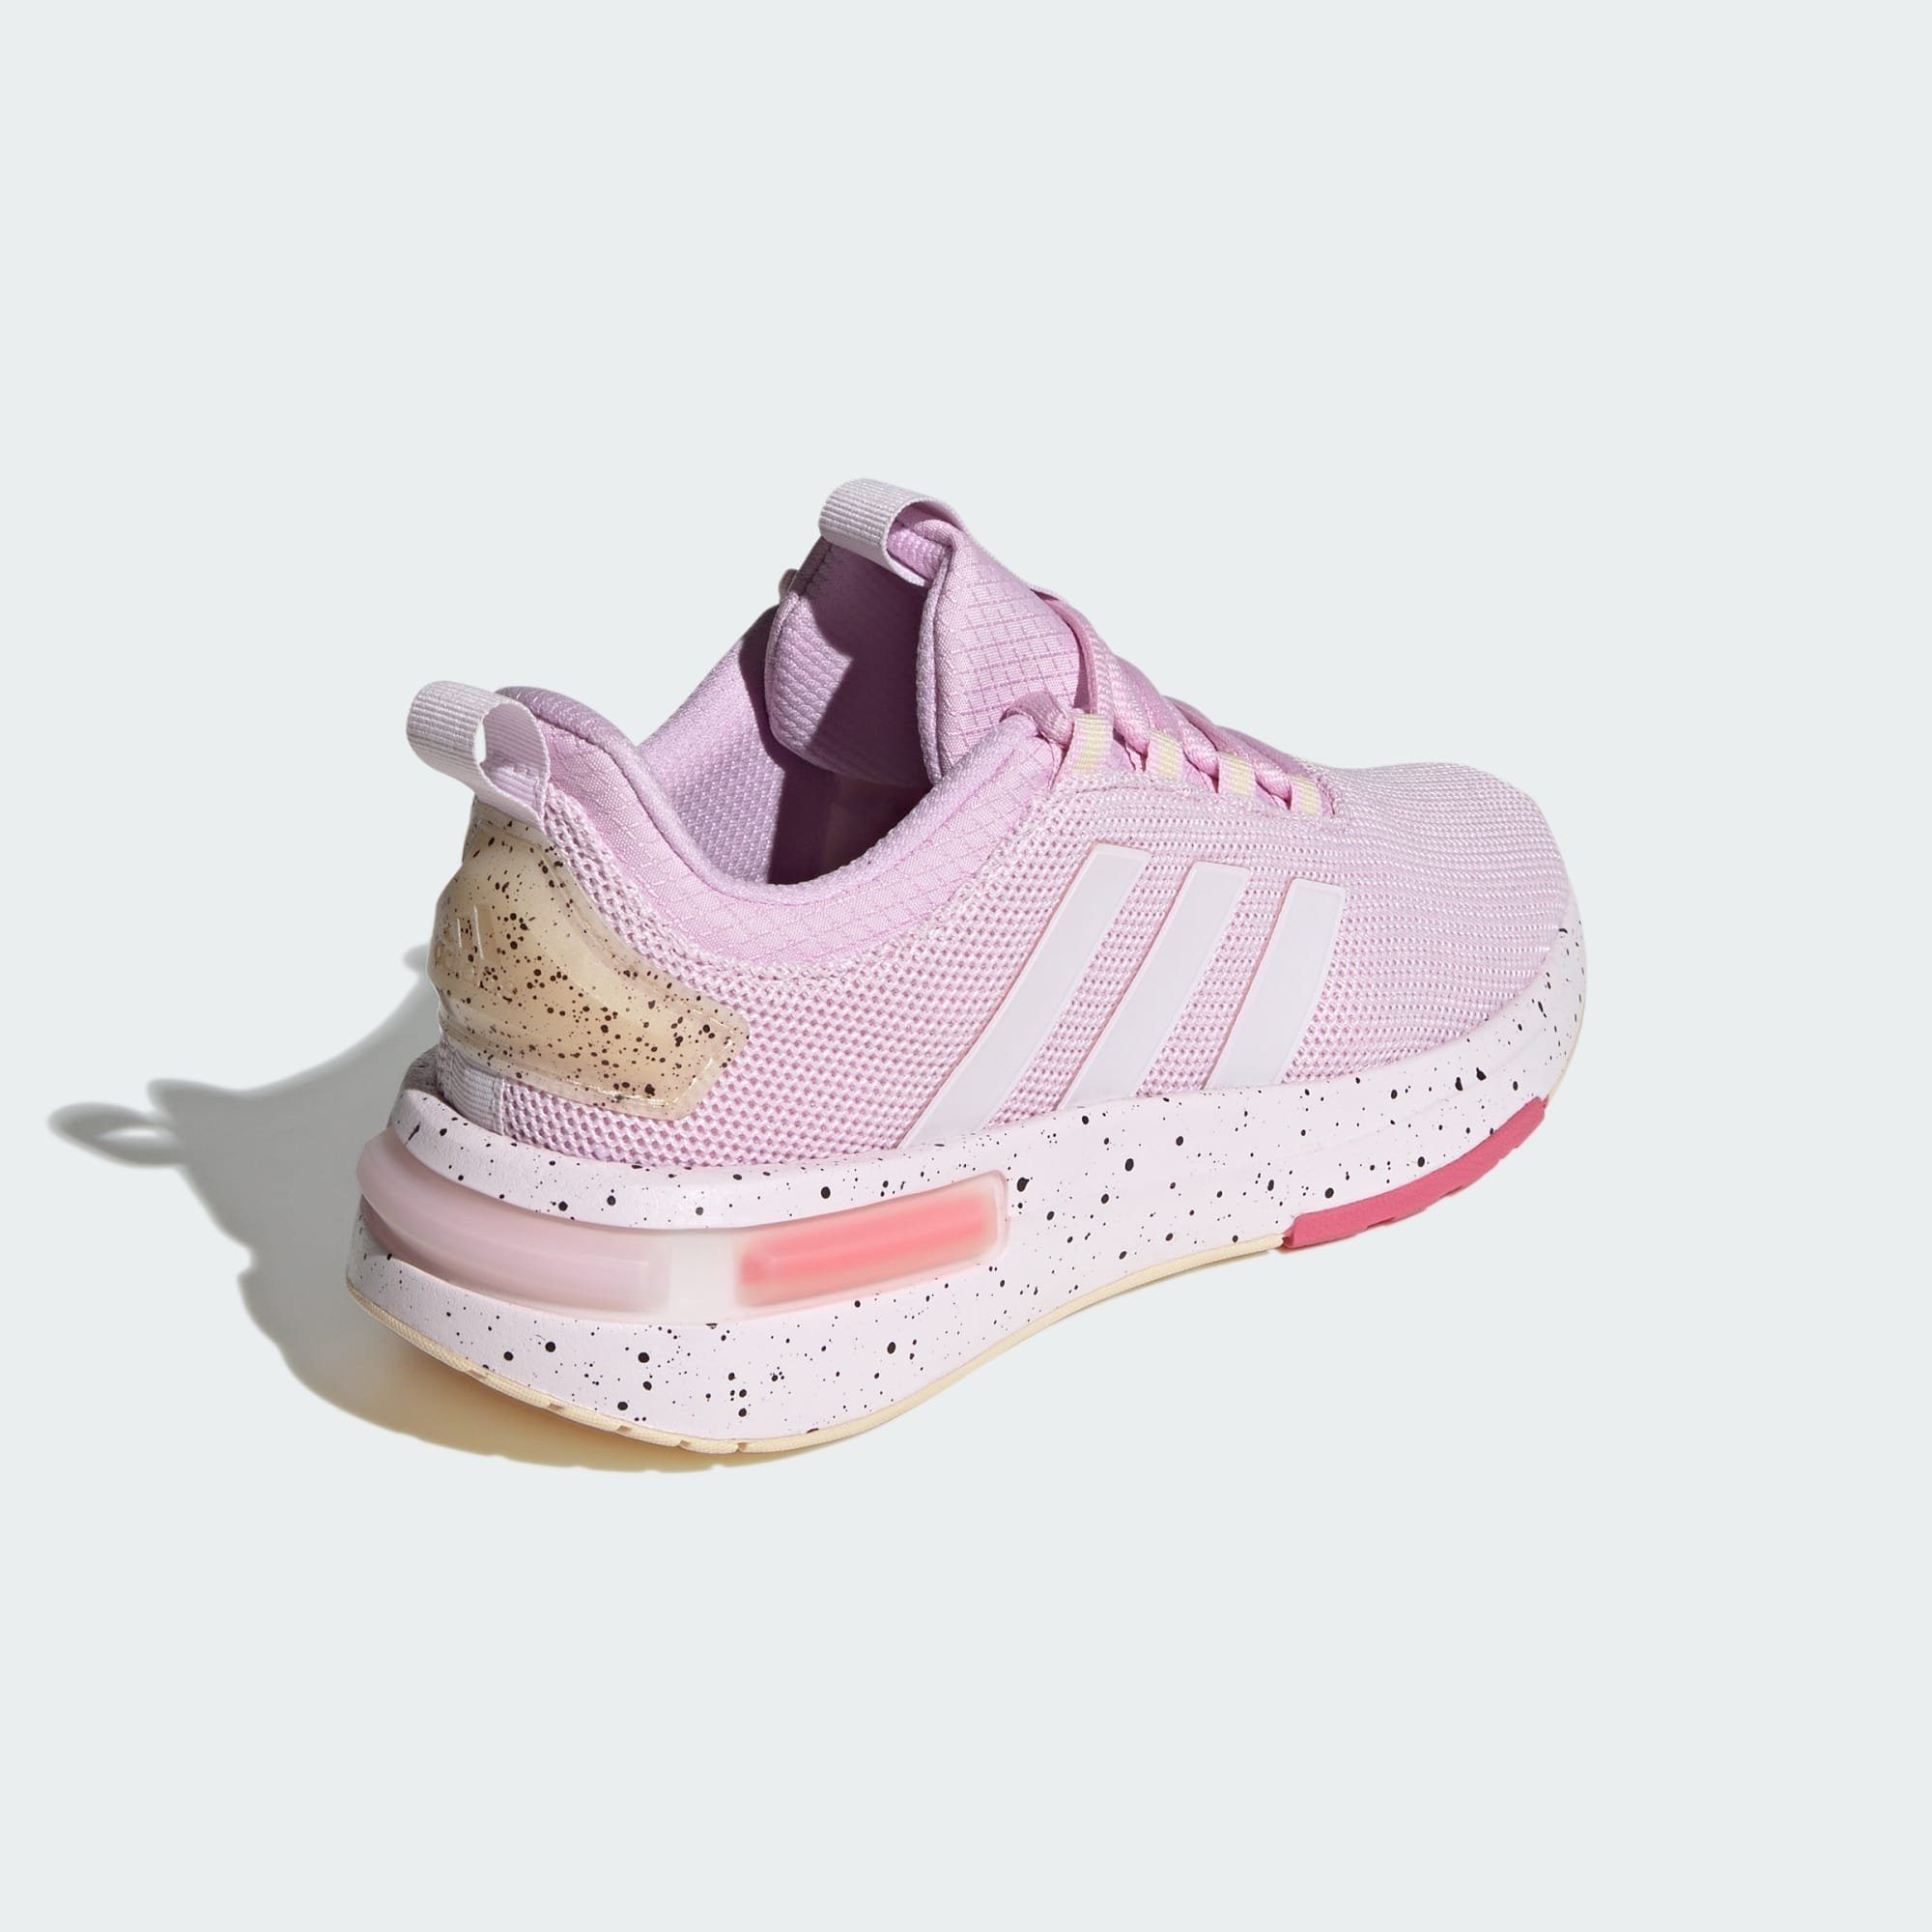 Fusion RACER TR23 Sneaker Fusion SCHUH Pink / Orchid Almost Pink adidas Sportswear /